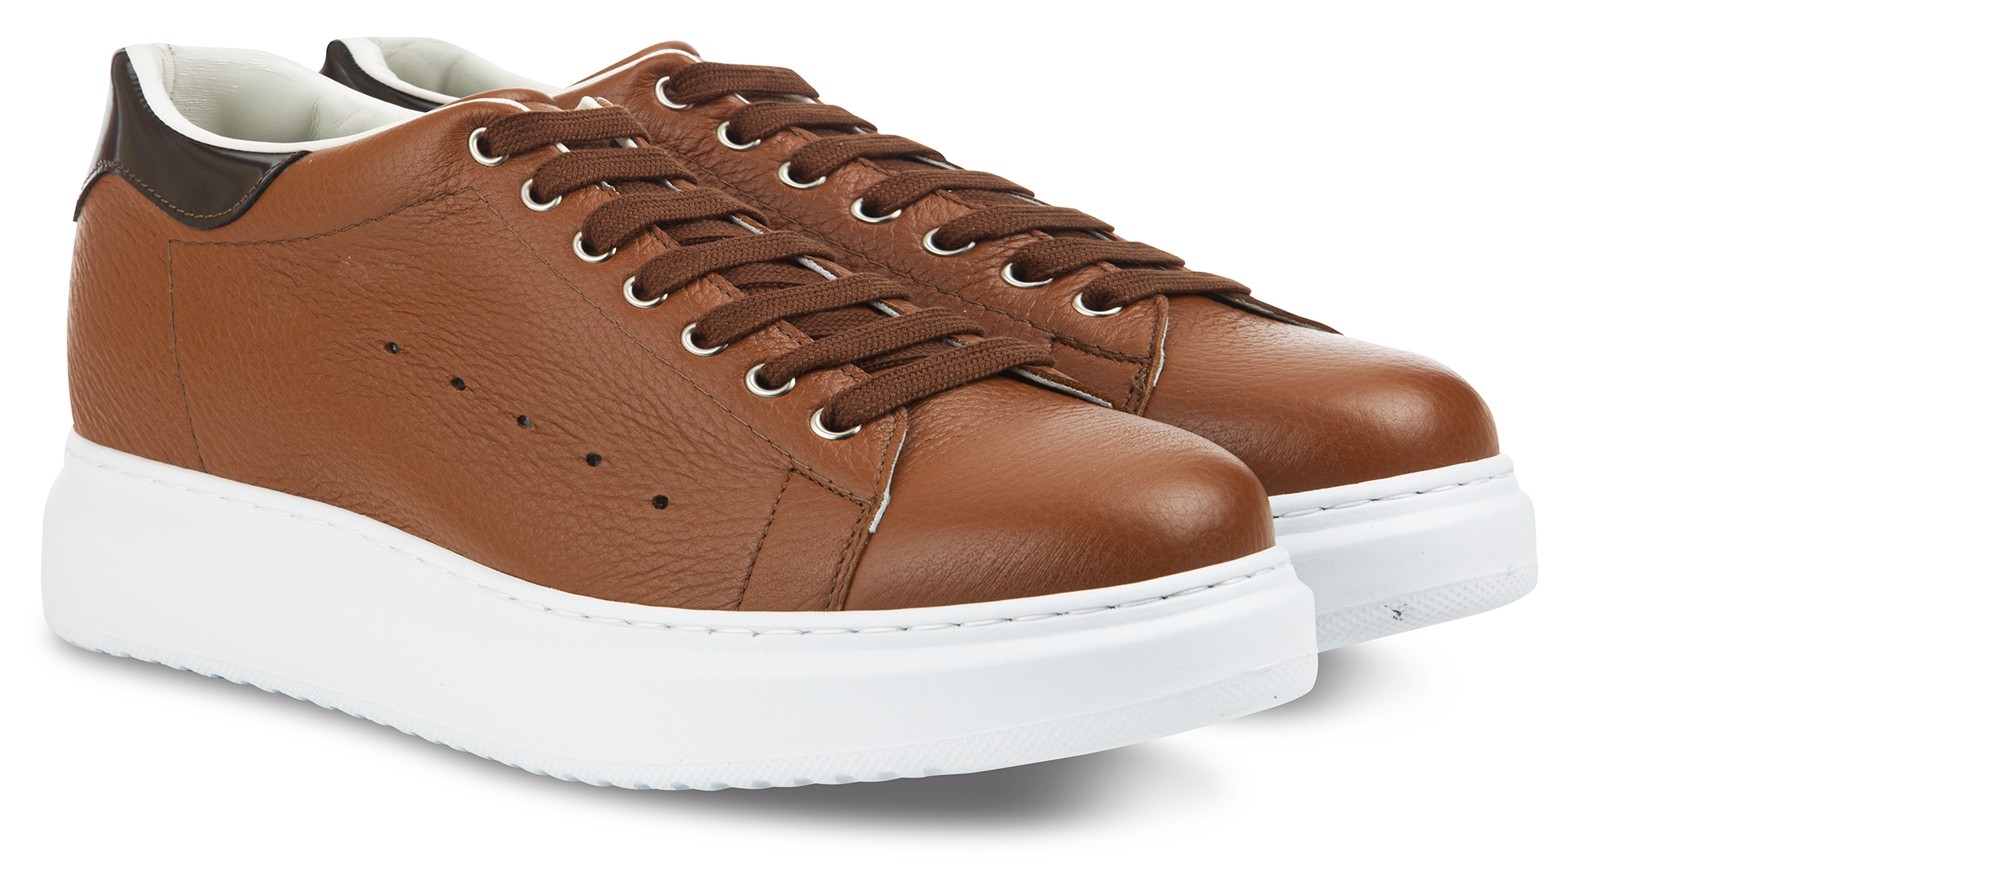 Banff - Elevator Sneakers in Full Grain Leather from 2.4 to 3.1 inches